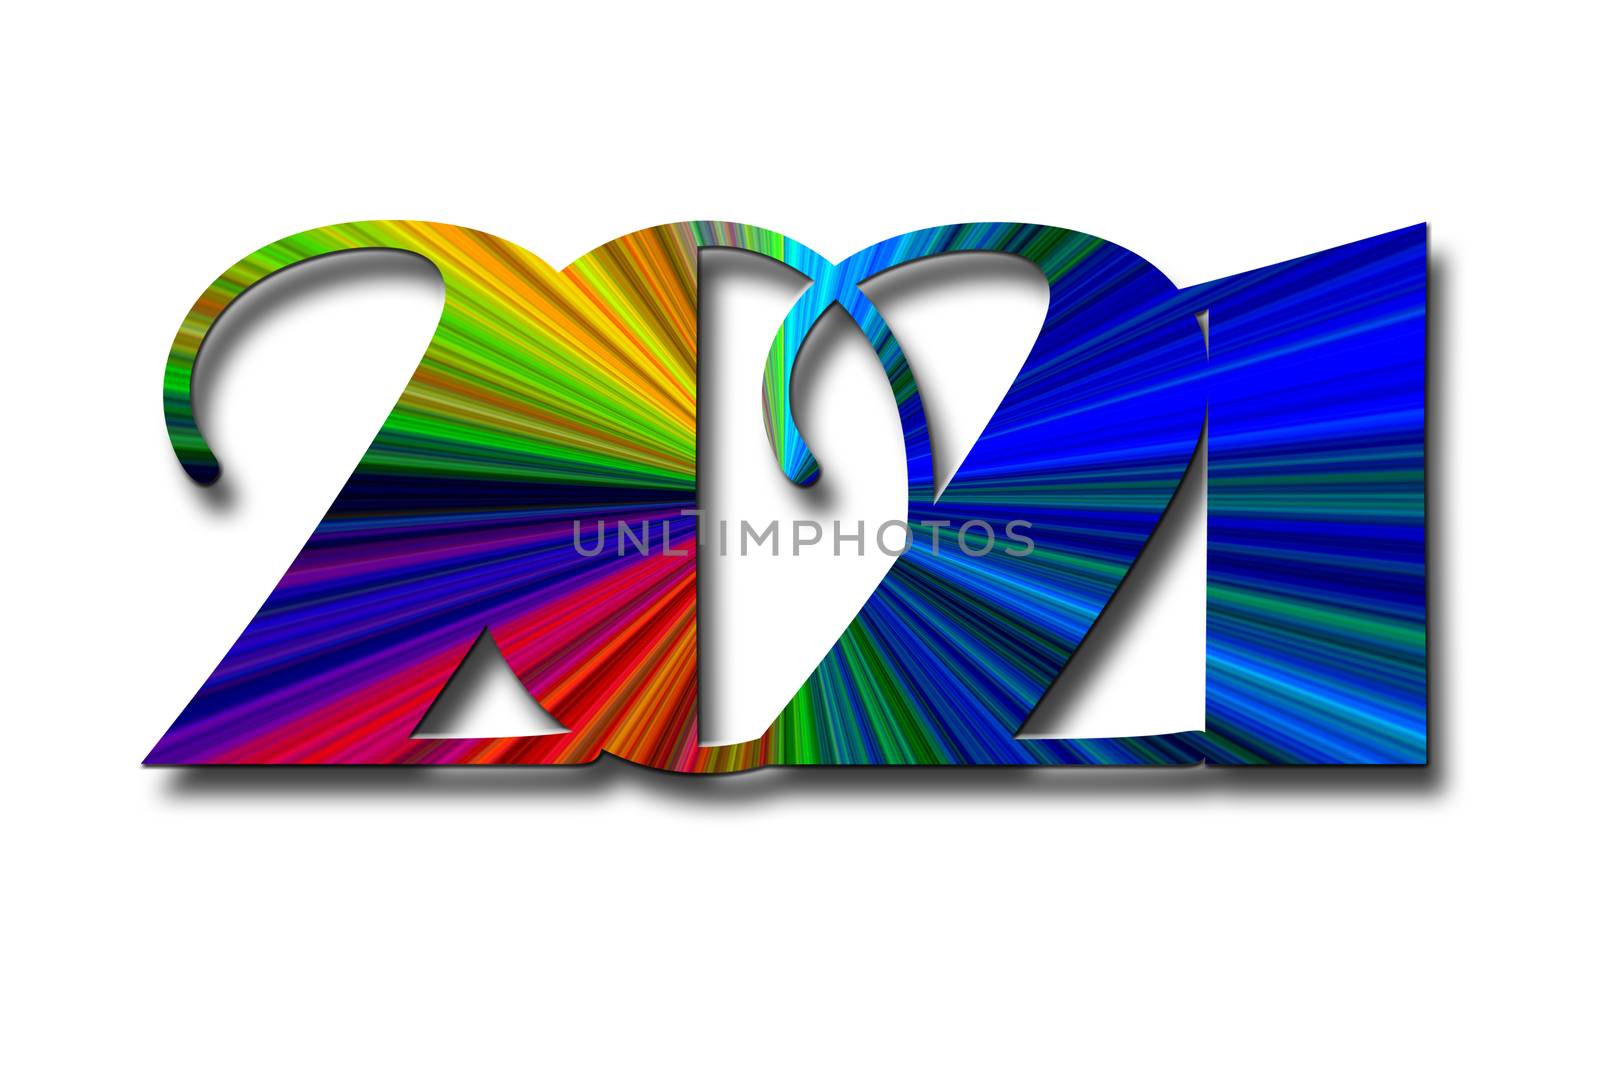 2021 New year greeting card in neon color for banners, flyers, greetings, invitations, business diaries, congratulations and posters. 3D illustration